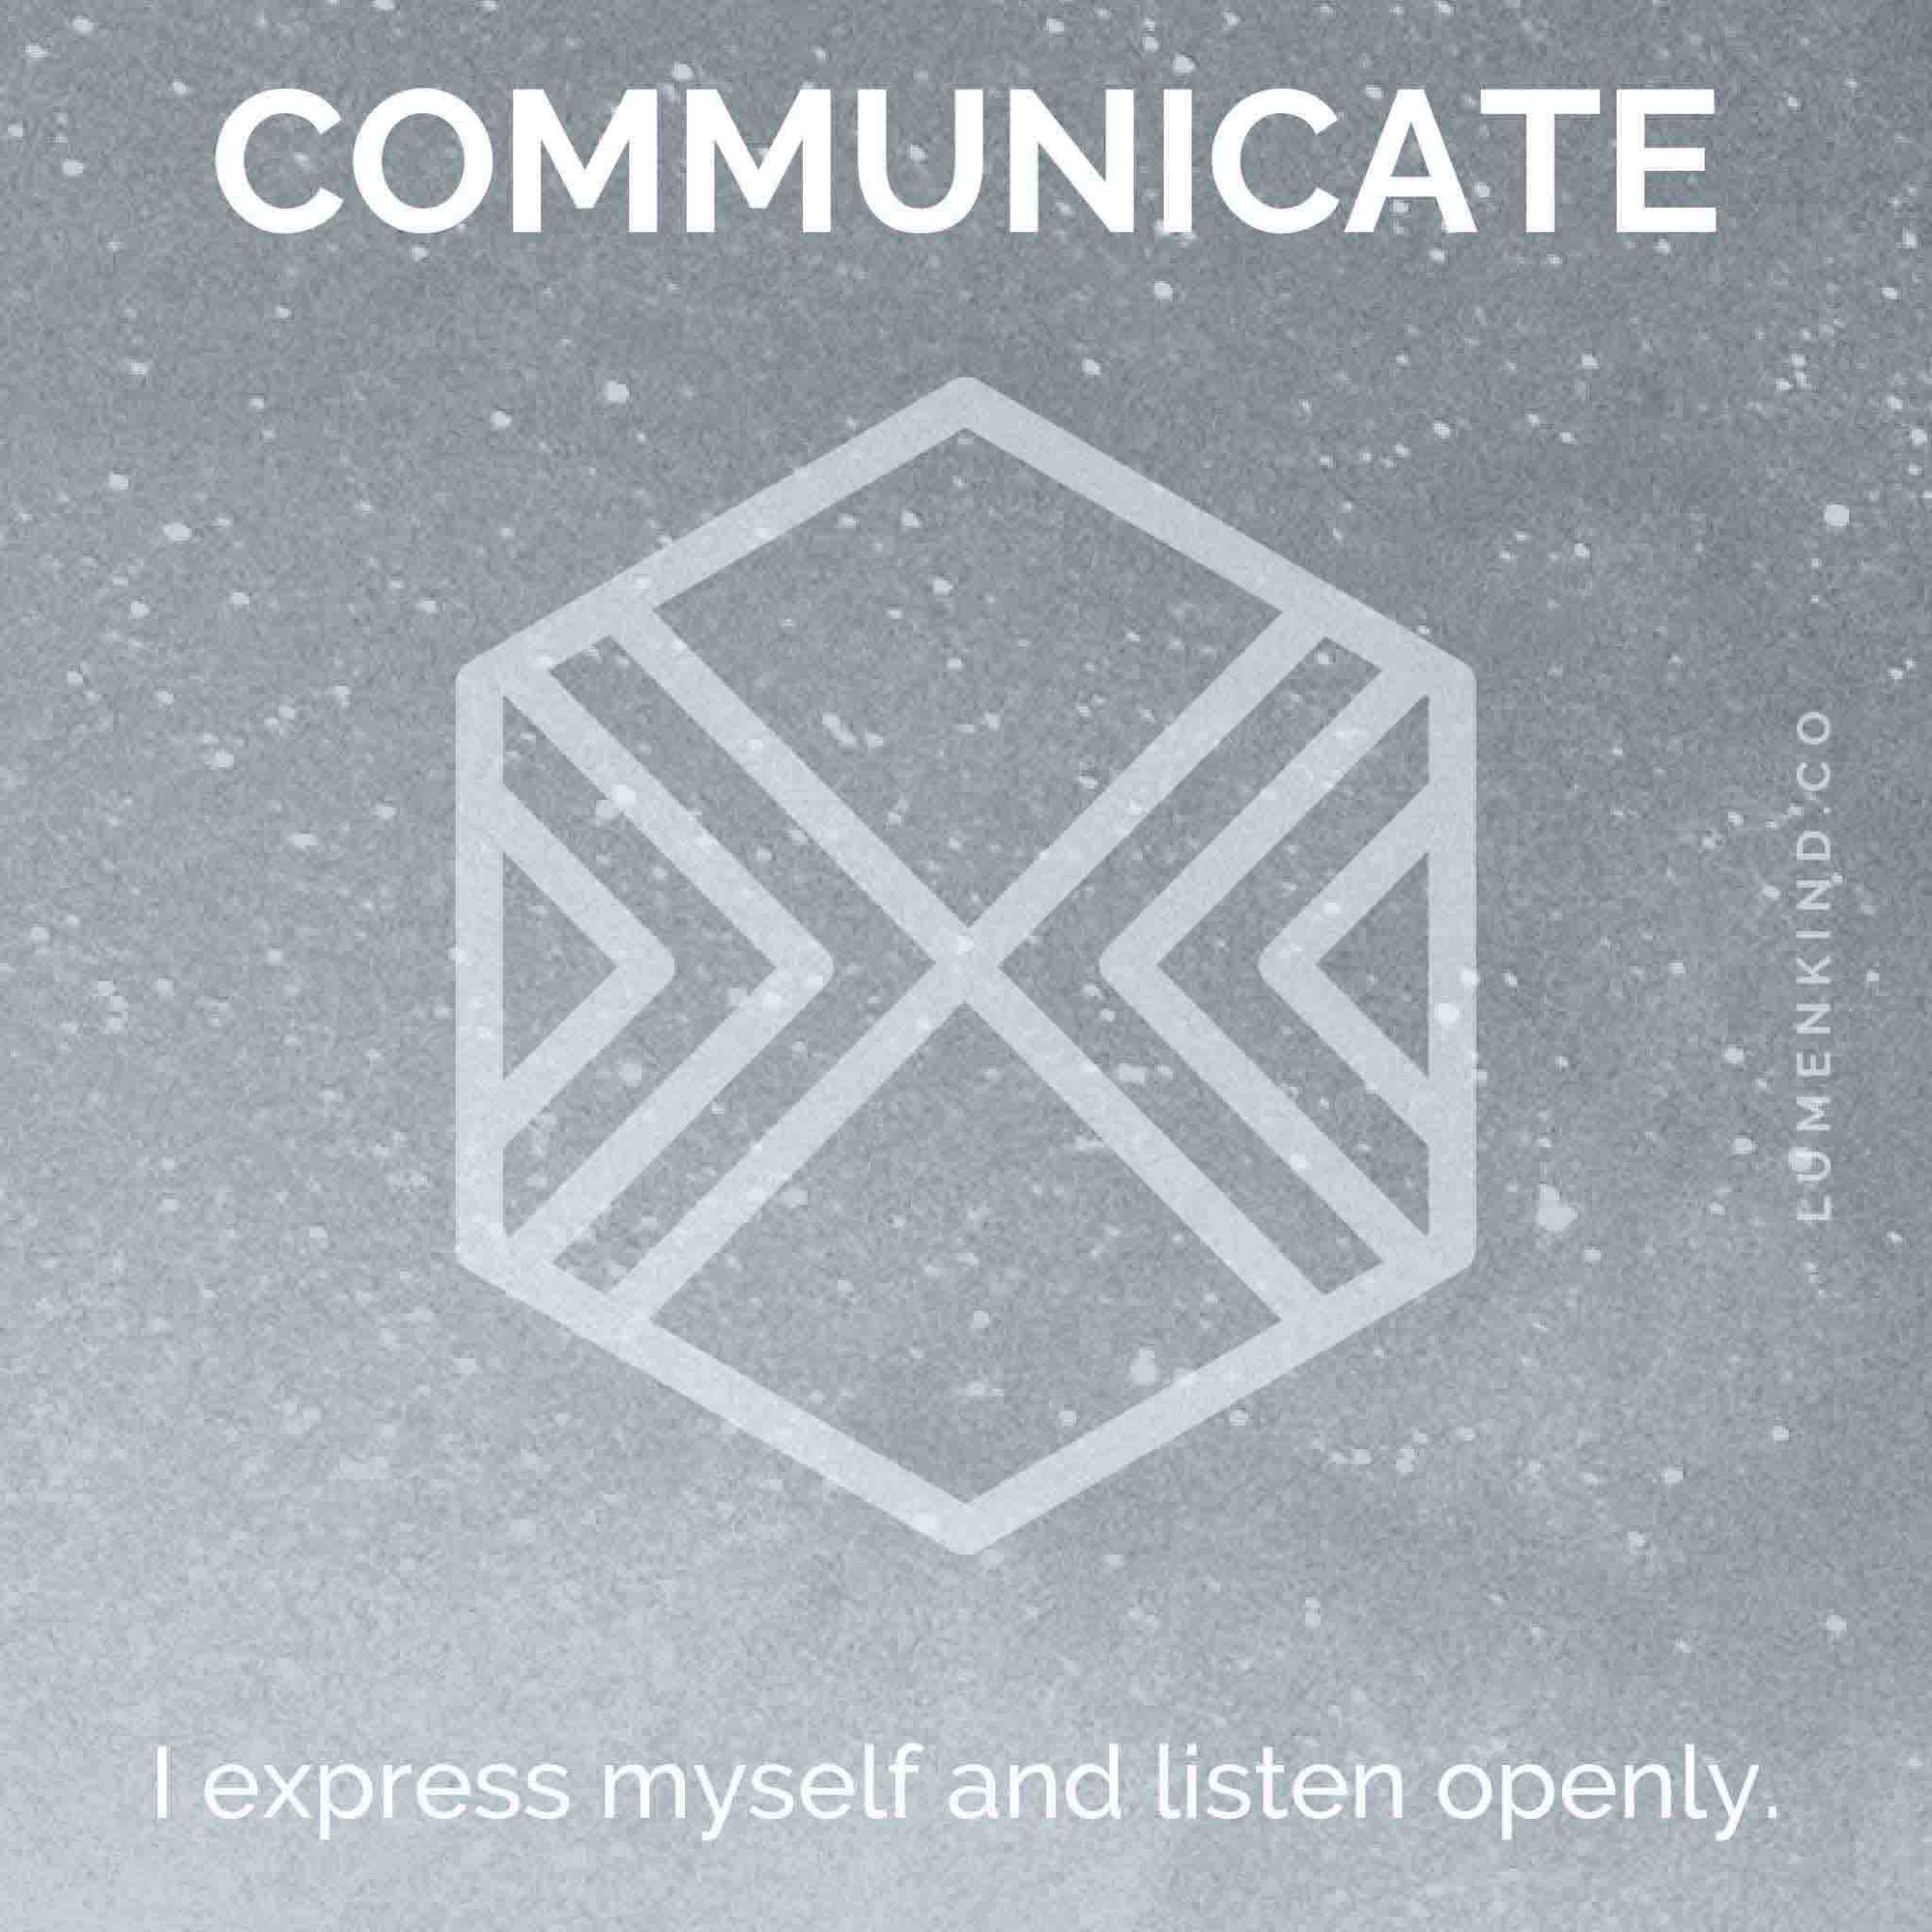 The suggested intention is COMMUNICATE. I listen and express myself openly.